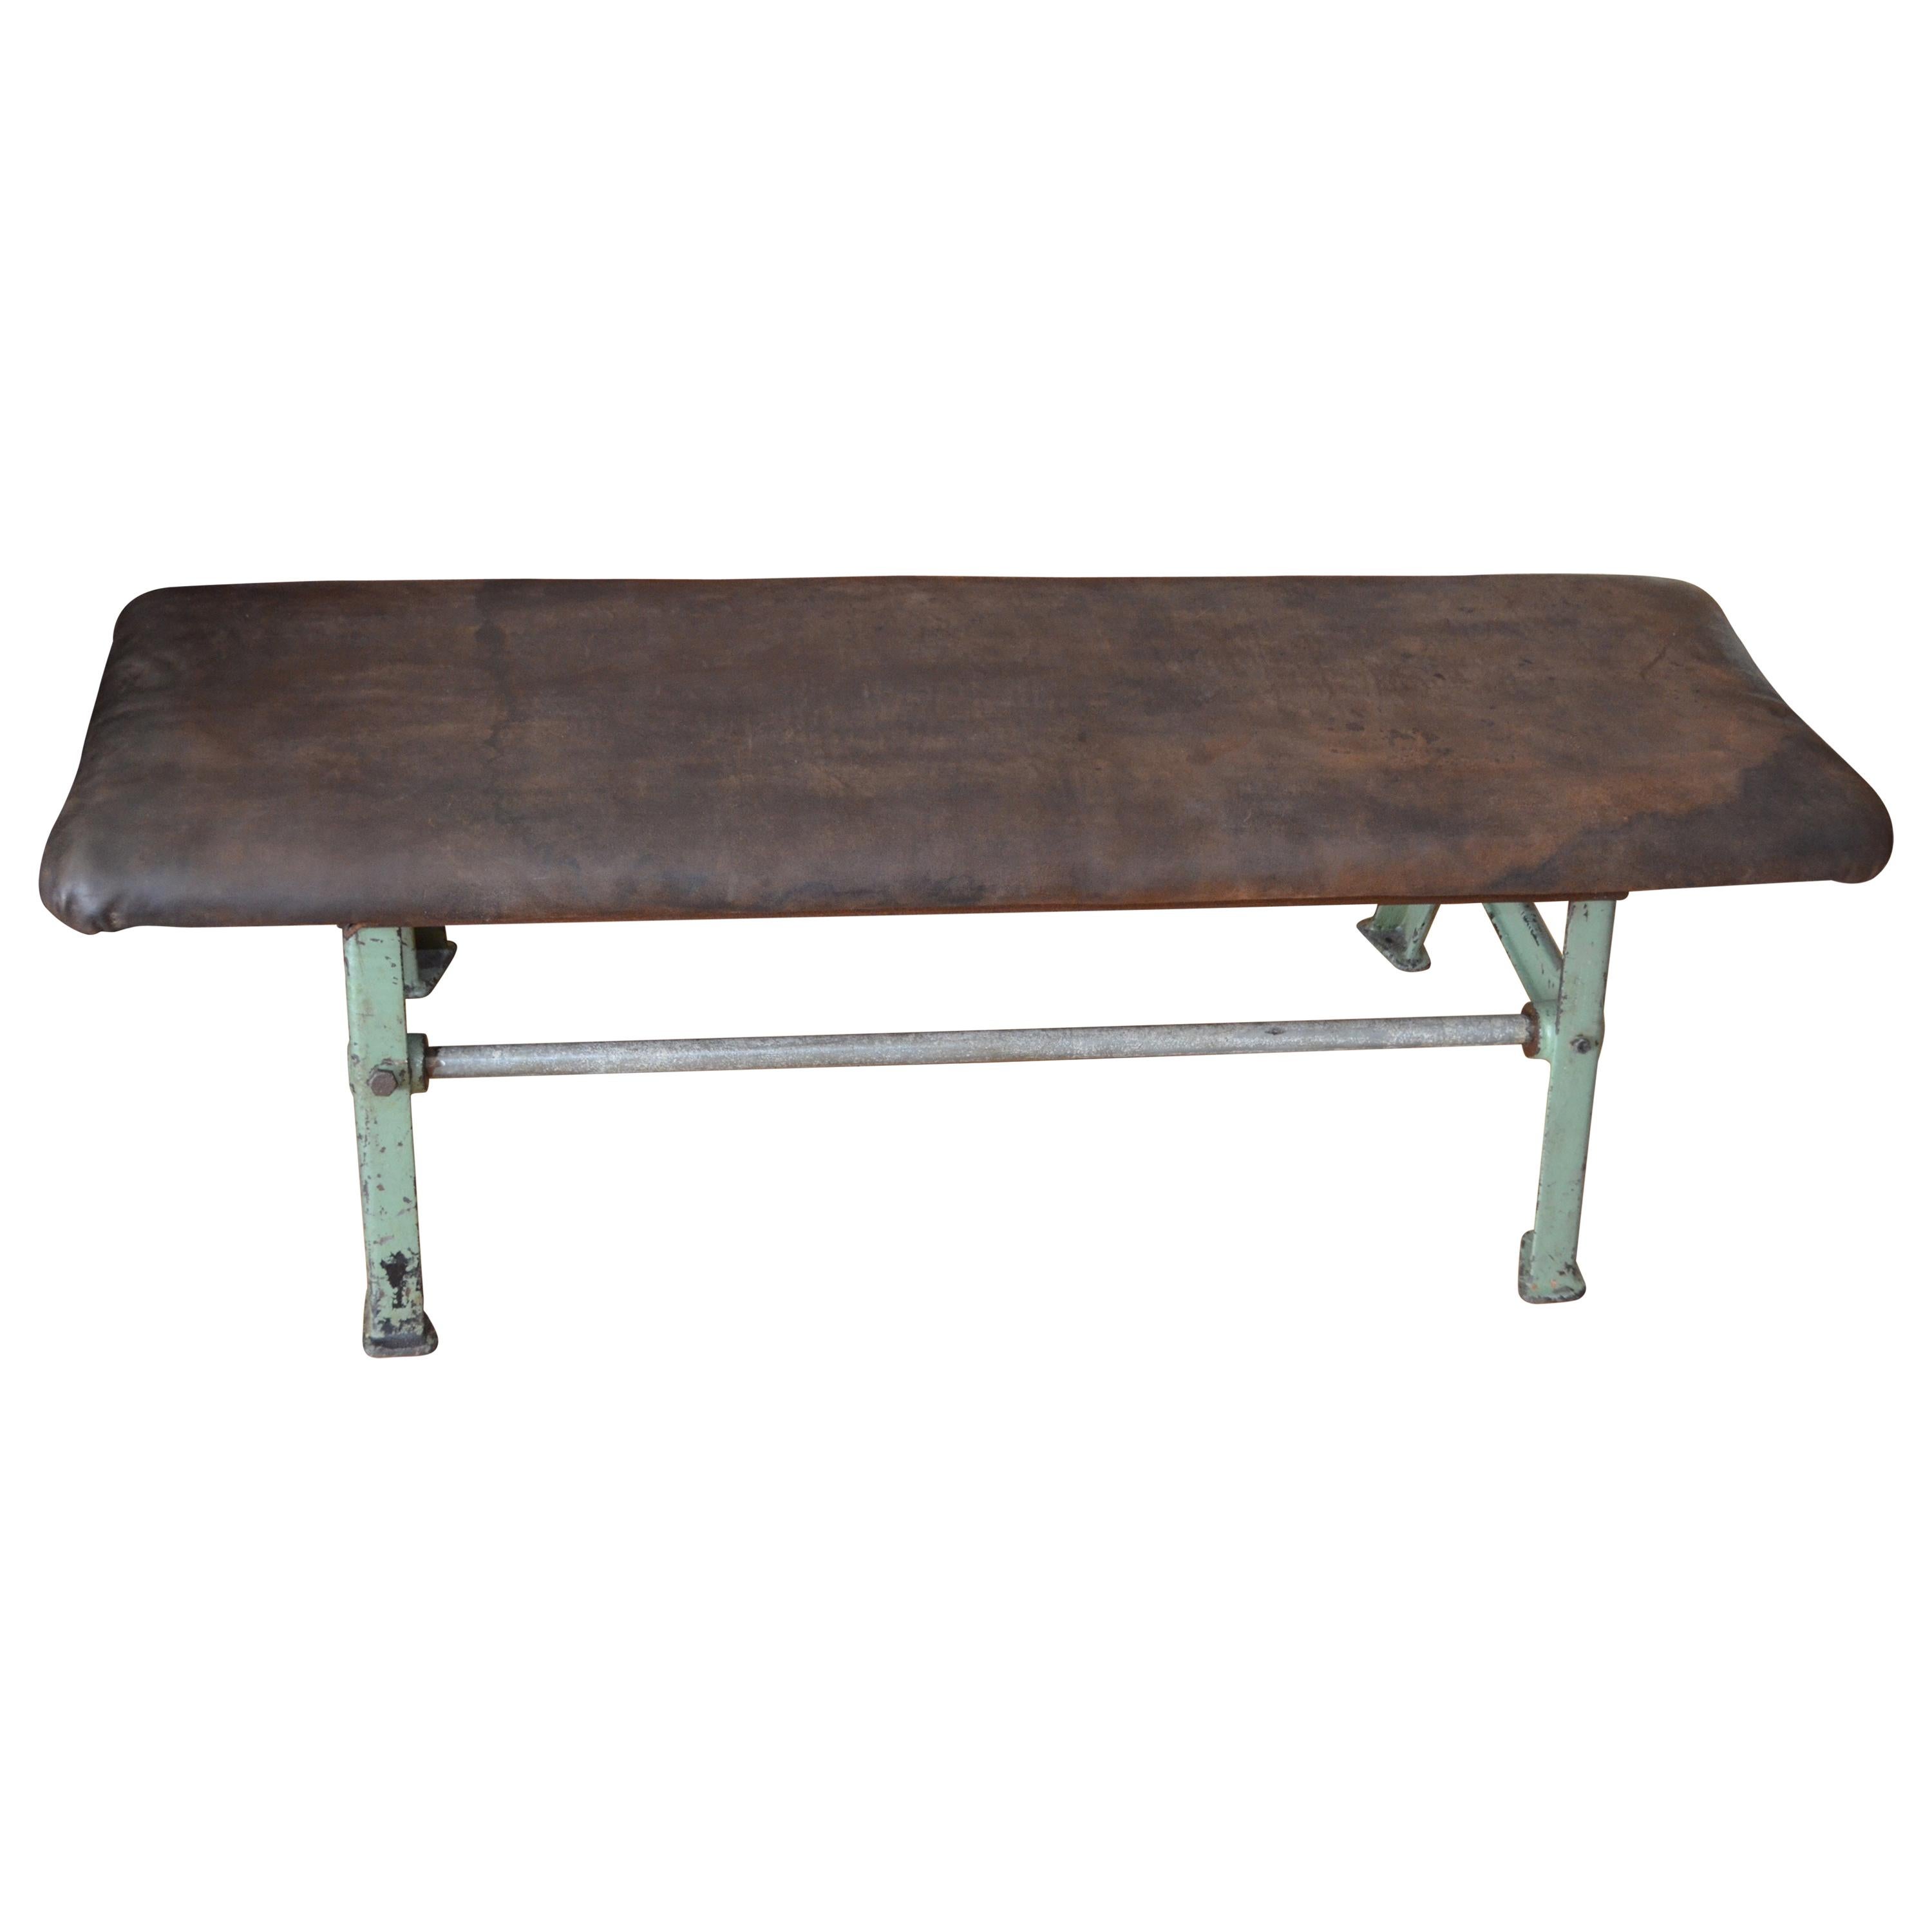 Bench of Suede Leather with Industrial Forged Iron Base, Early 20th Century For Sale